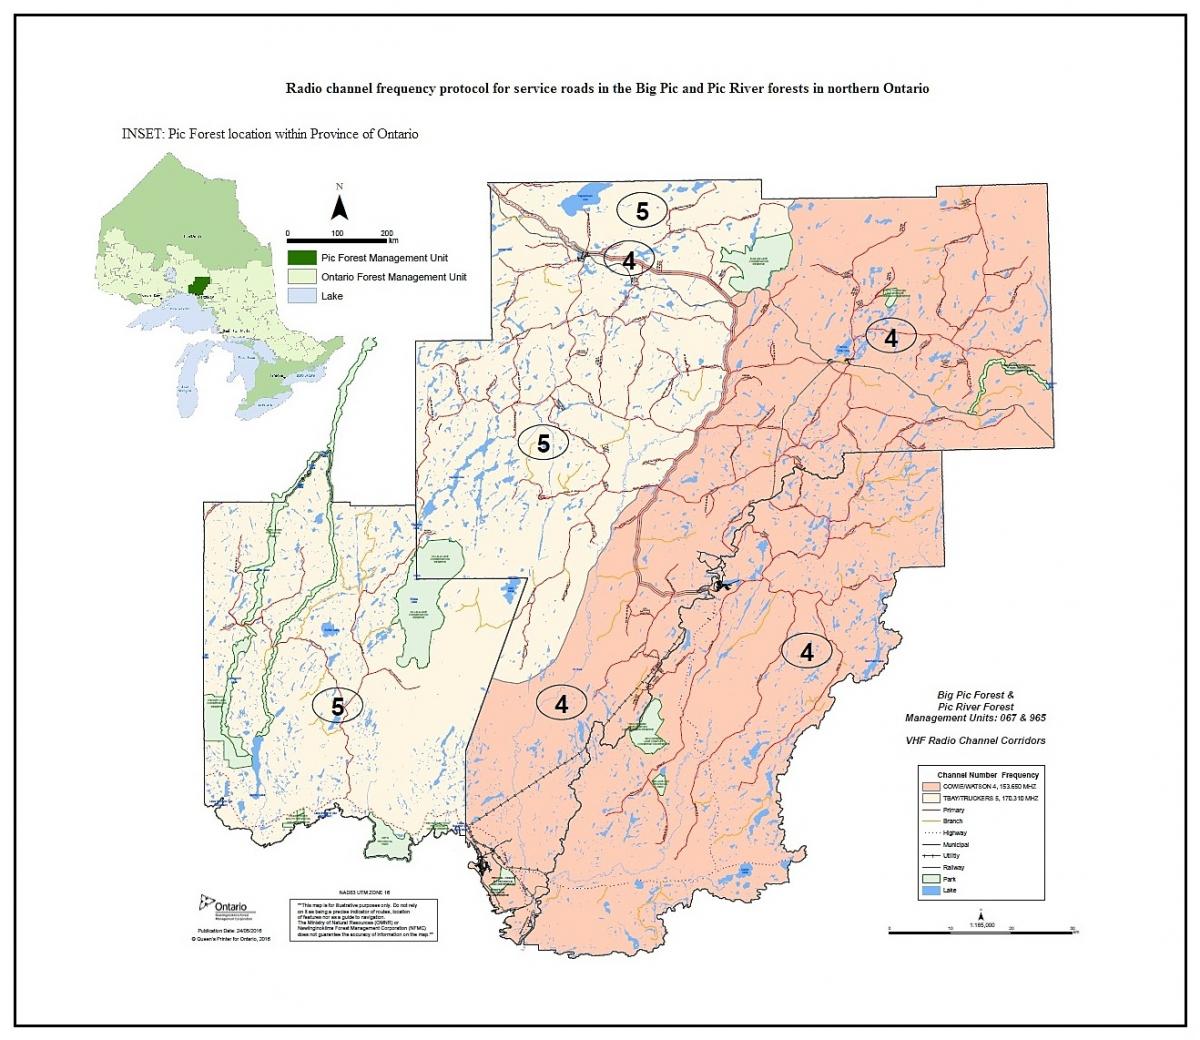 Radio channel protocol map for service roads in northern Ontario